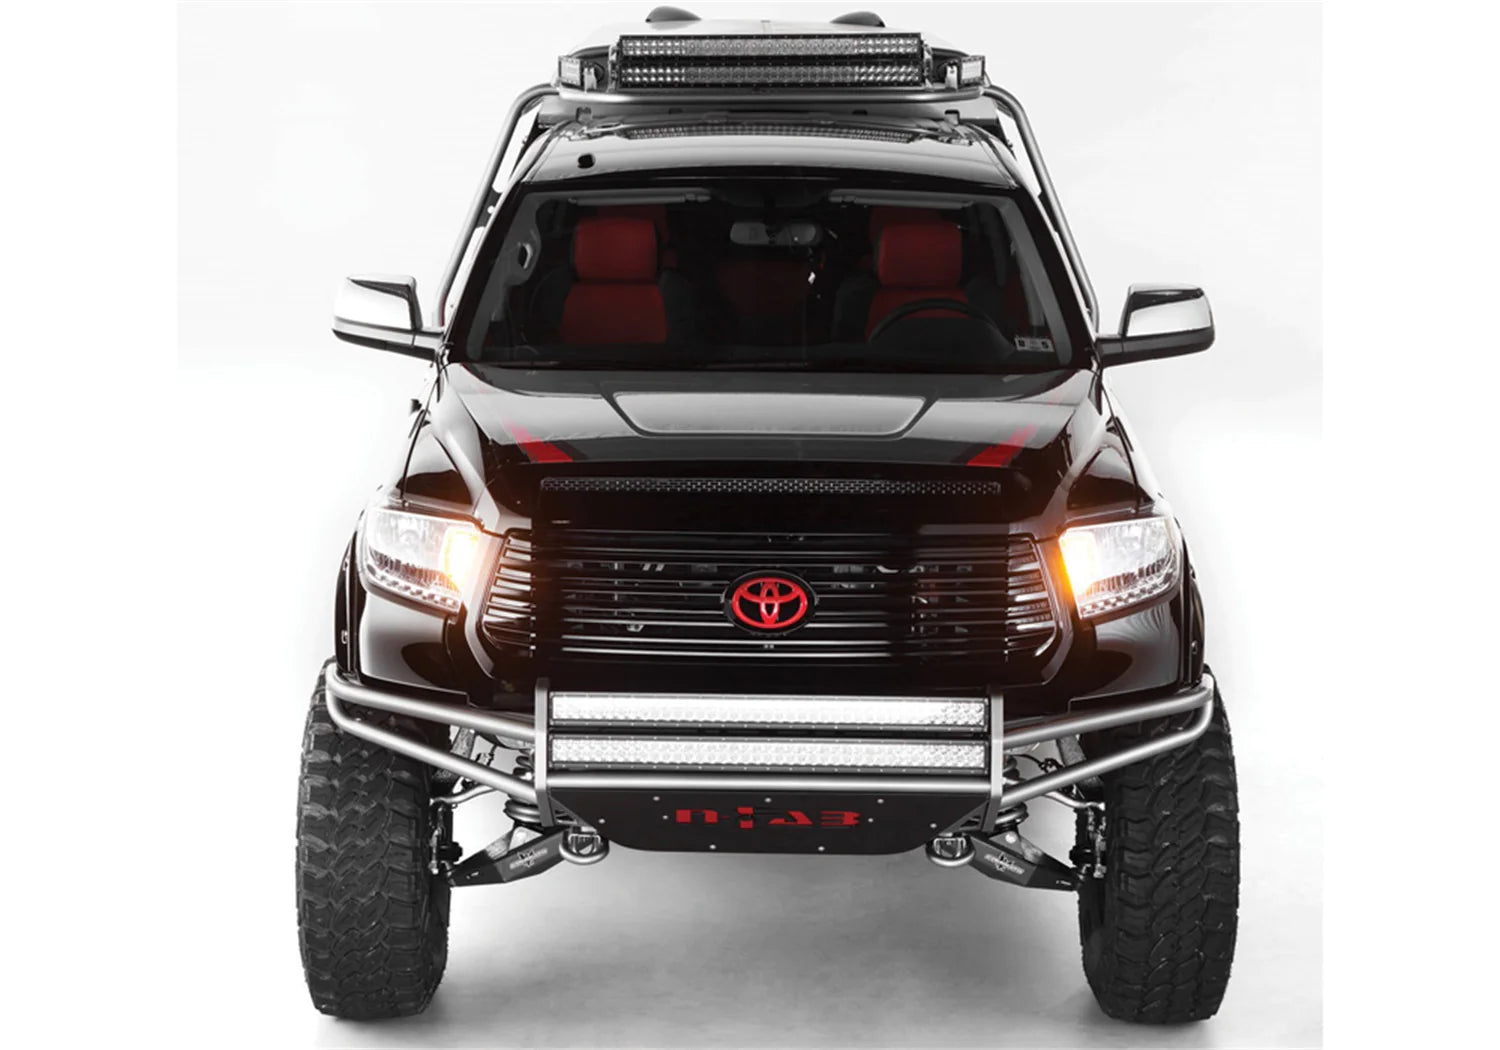 Front view lifted Toyota Tundra with off-road bumper